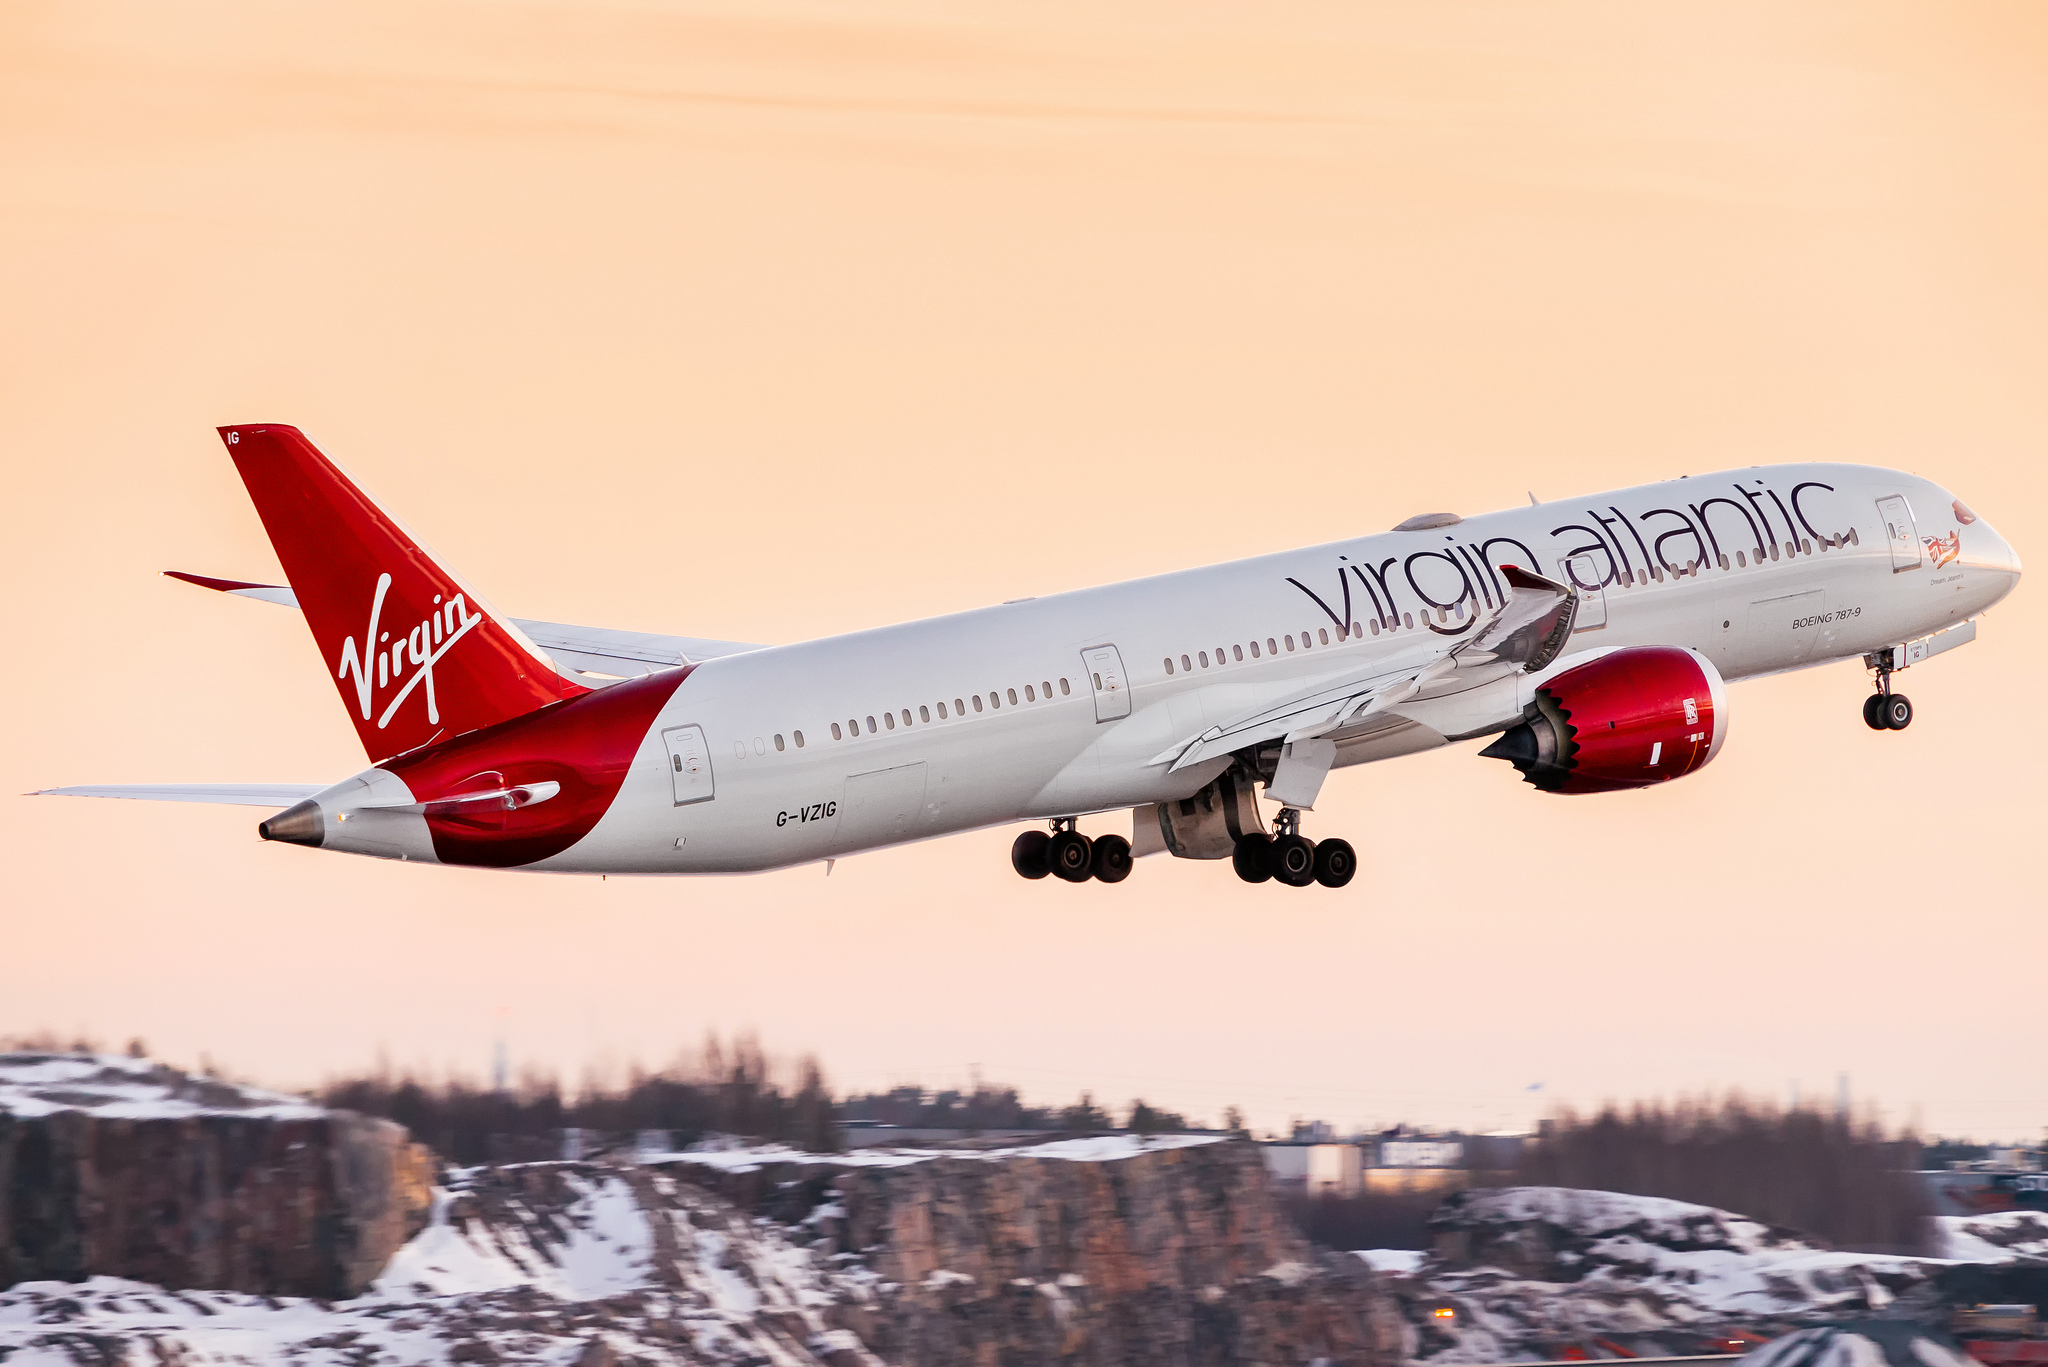 Caught This Virgin Atlantic 787 9 Departing Helsinki Airport Today After A Medical Emergency Caused It To Divert Down Here In The Afternoon. Hope The Passenger Is Ok.: Aviation